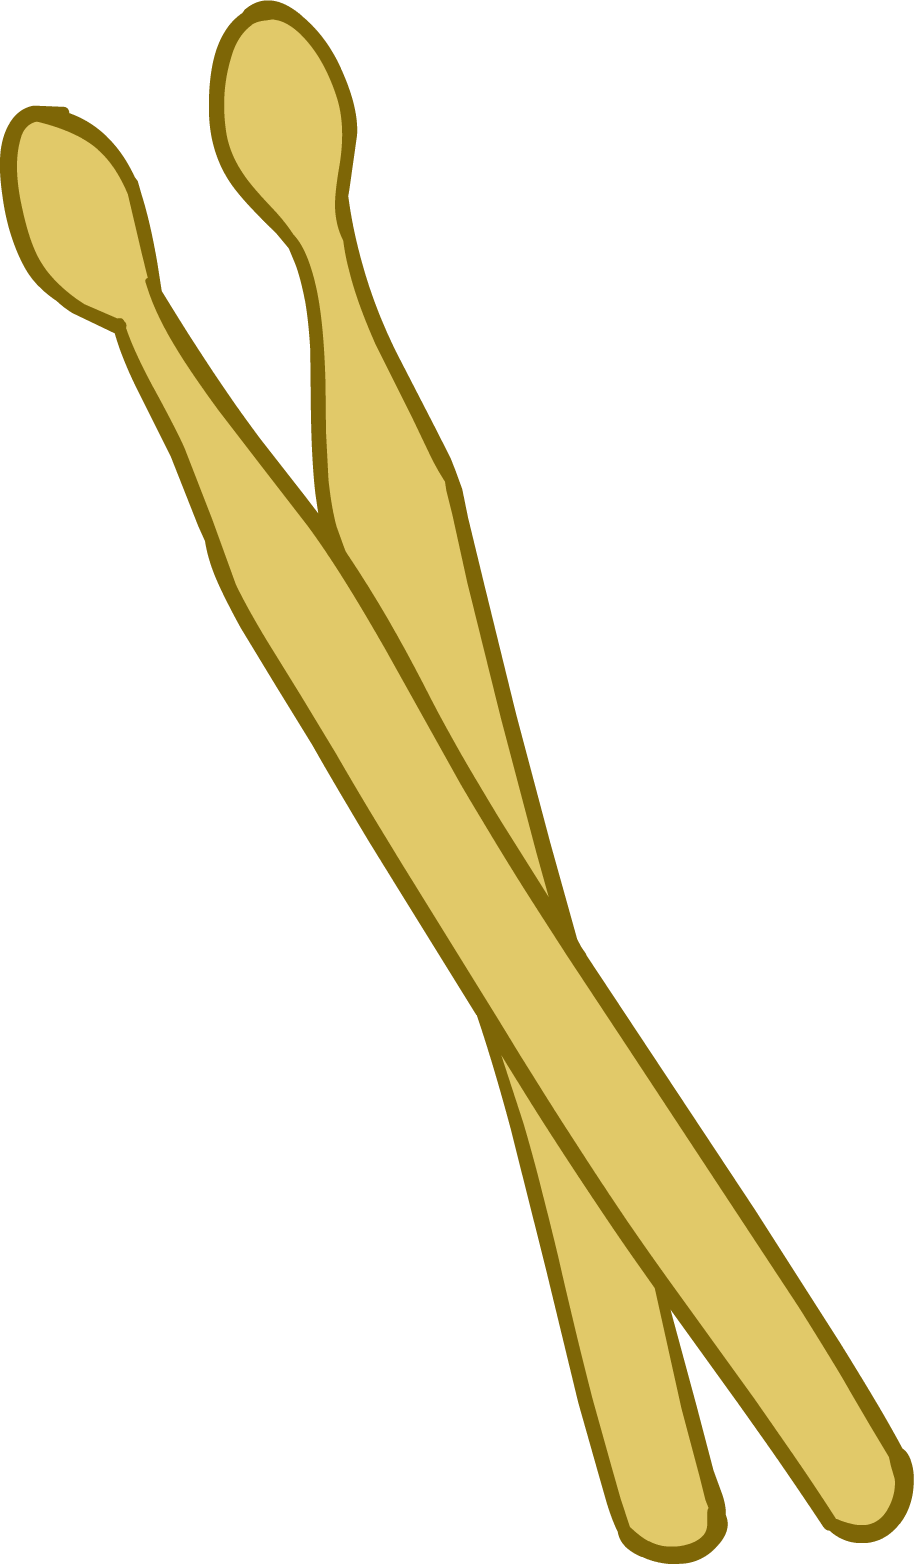 A Pair Of Tweezers With Black Background